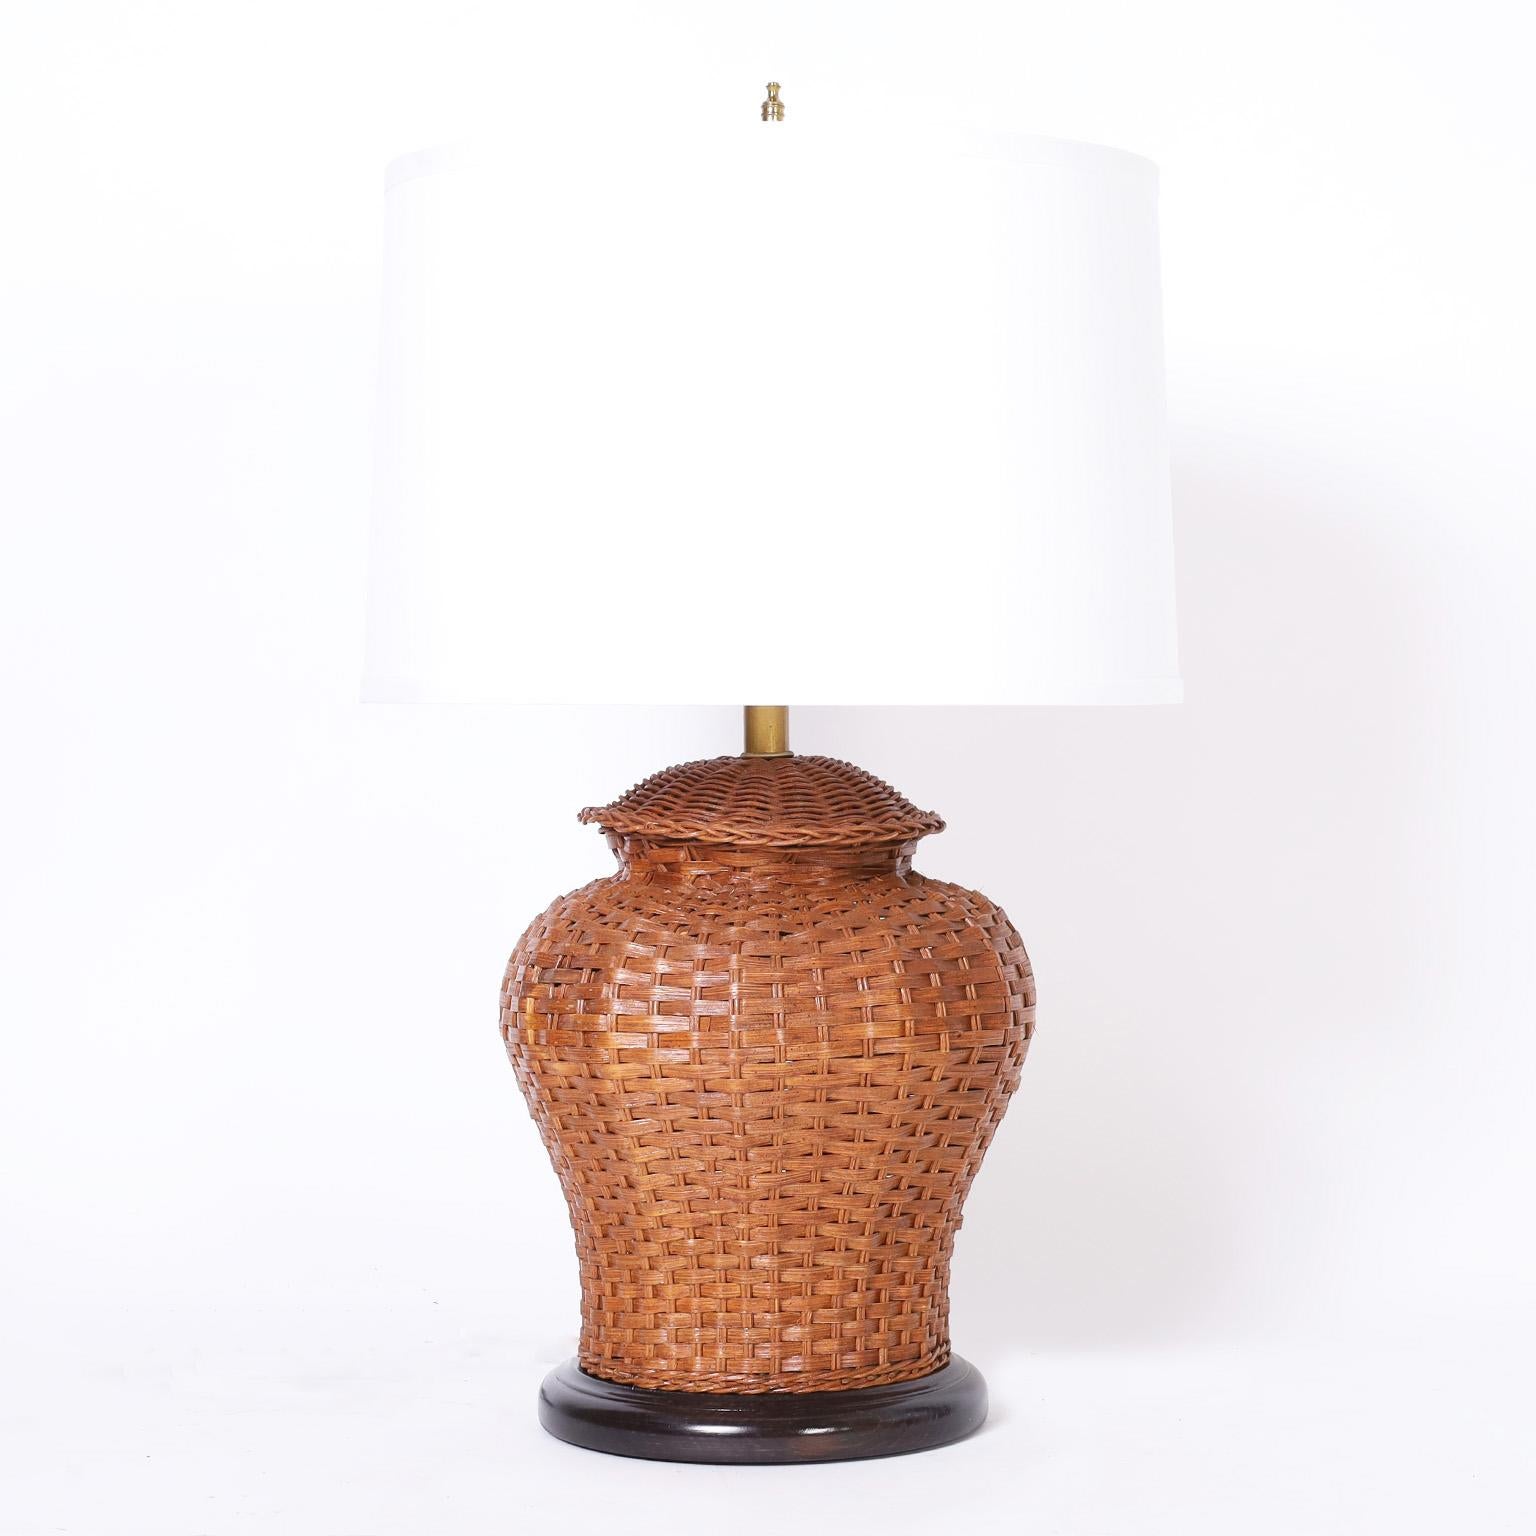 Asian modern style table lamps crafted in woven reed in a classic ginger jar form on lacquered wood bases.